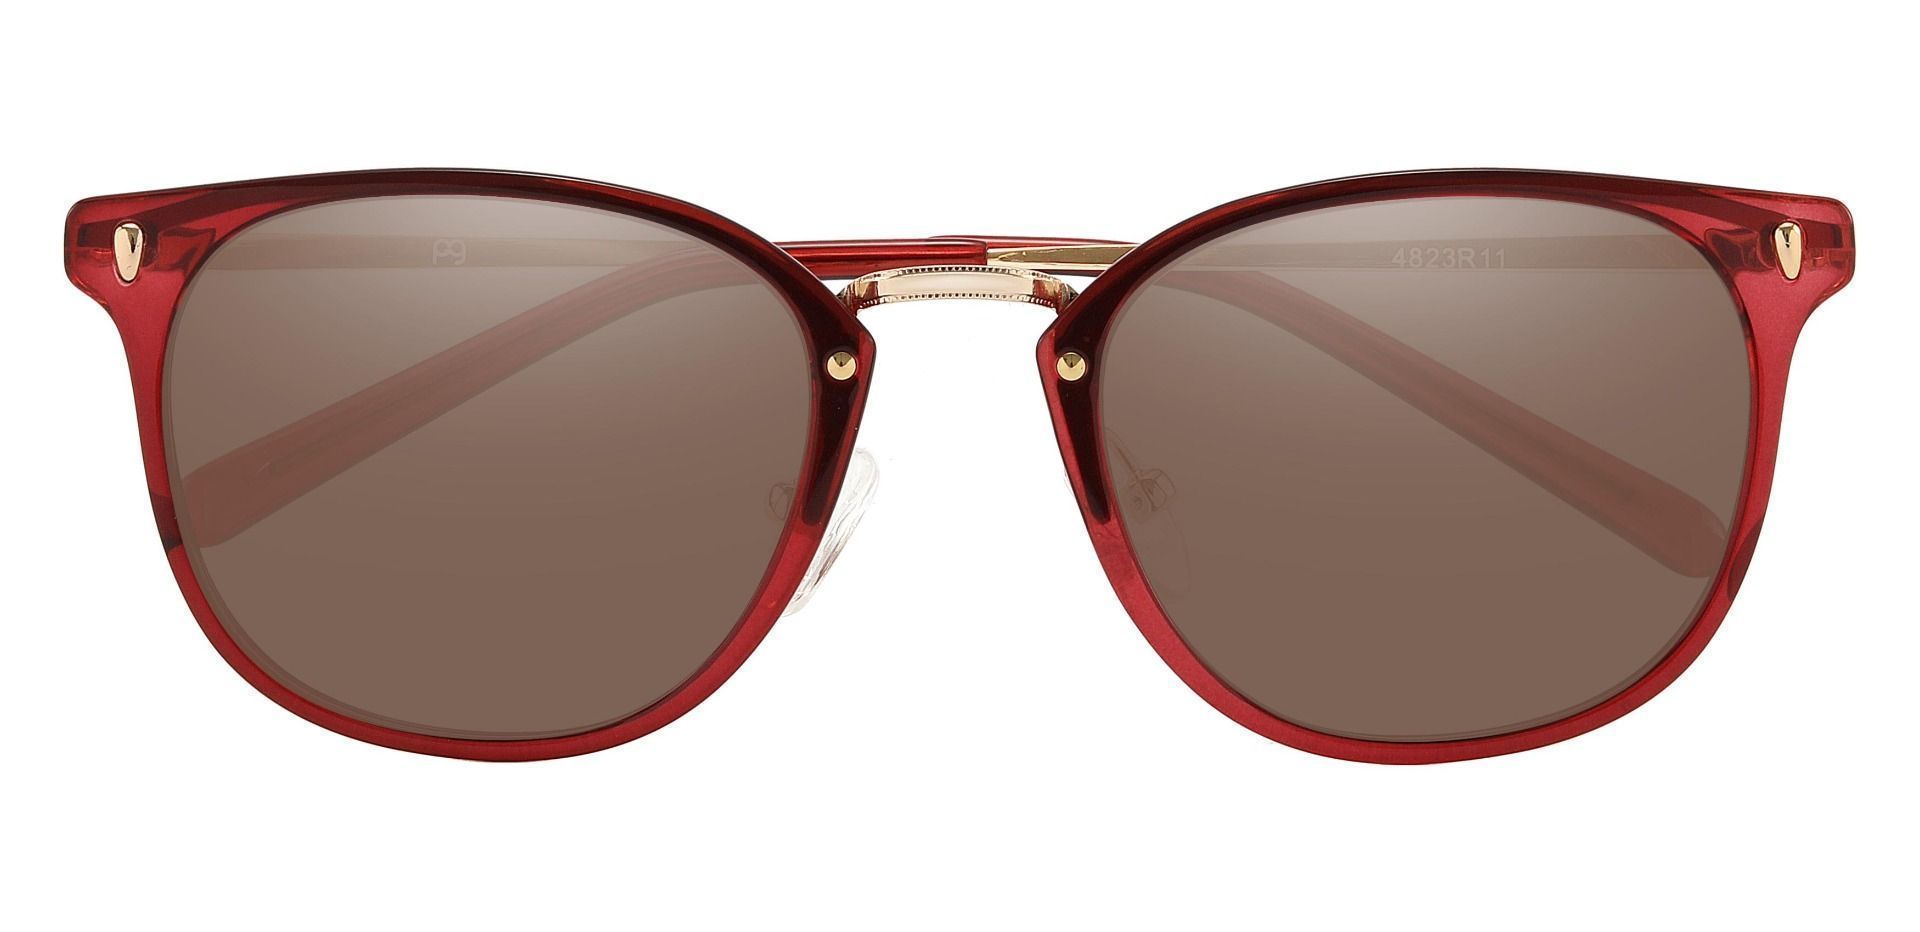 St. Clair Oval Prescription Sunglasses - Red Frame With Brown Lenses